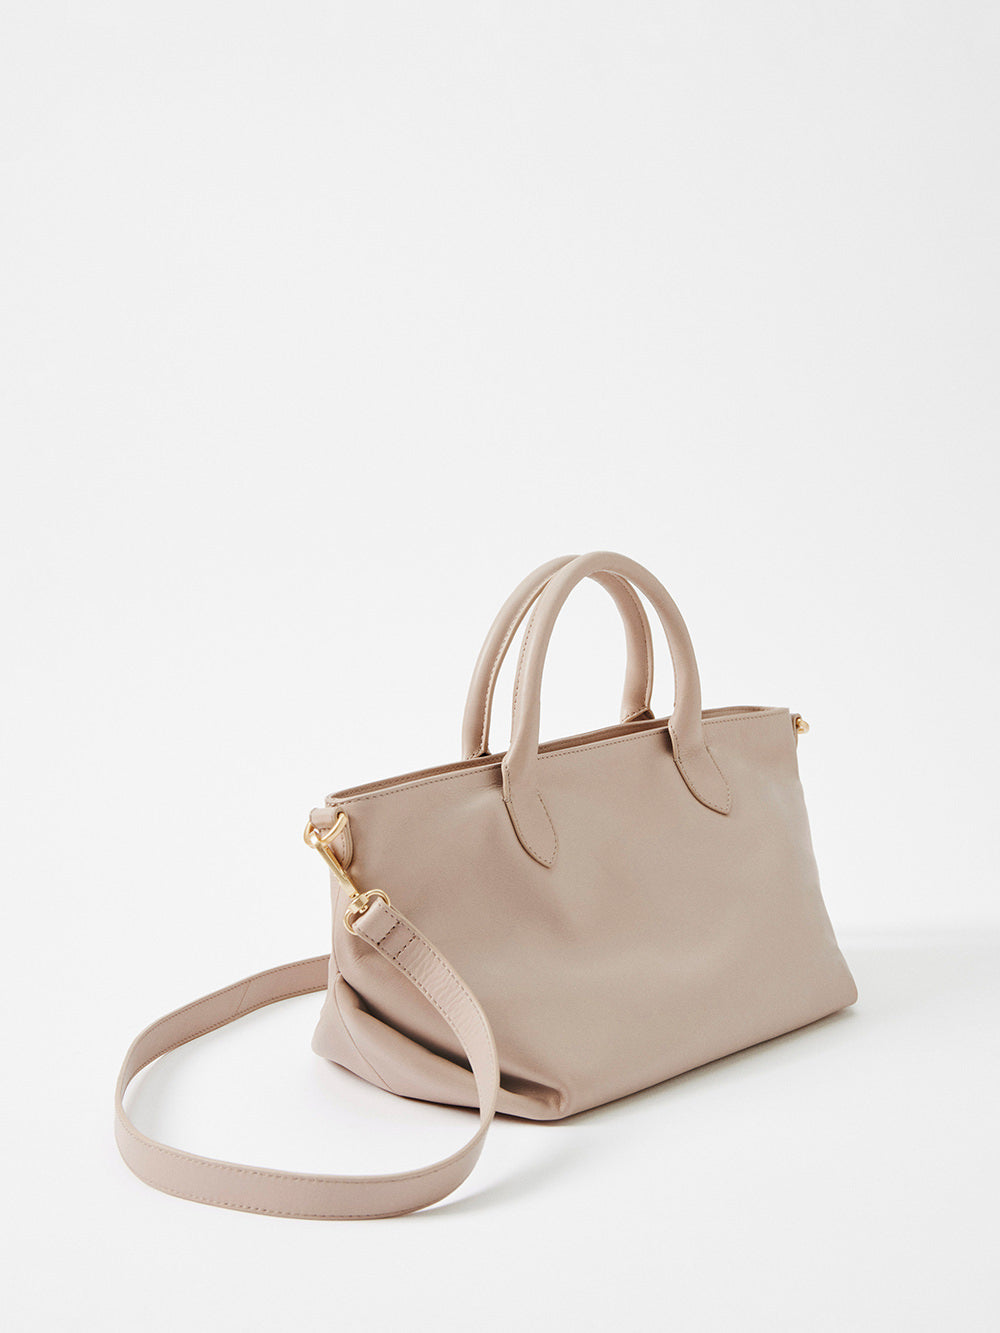 The Ellise Leather Tote